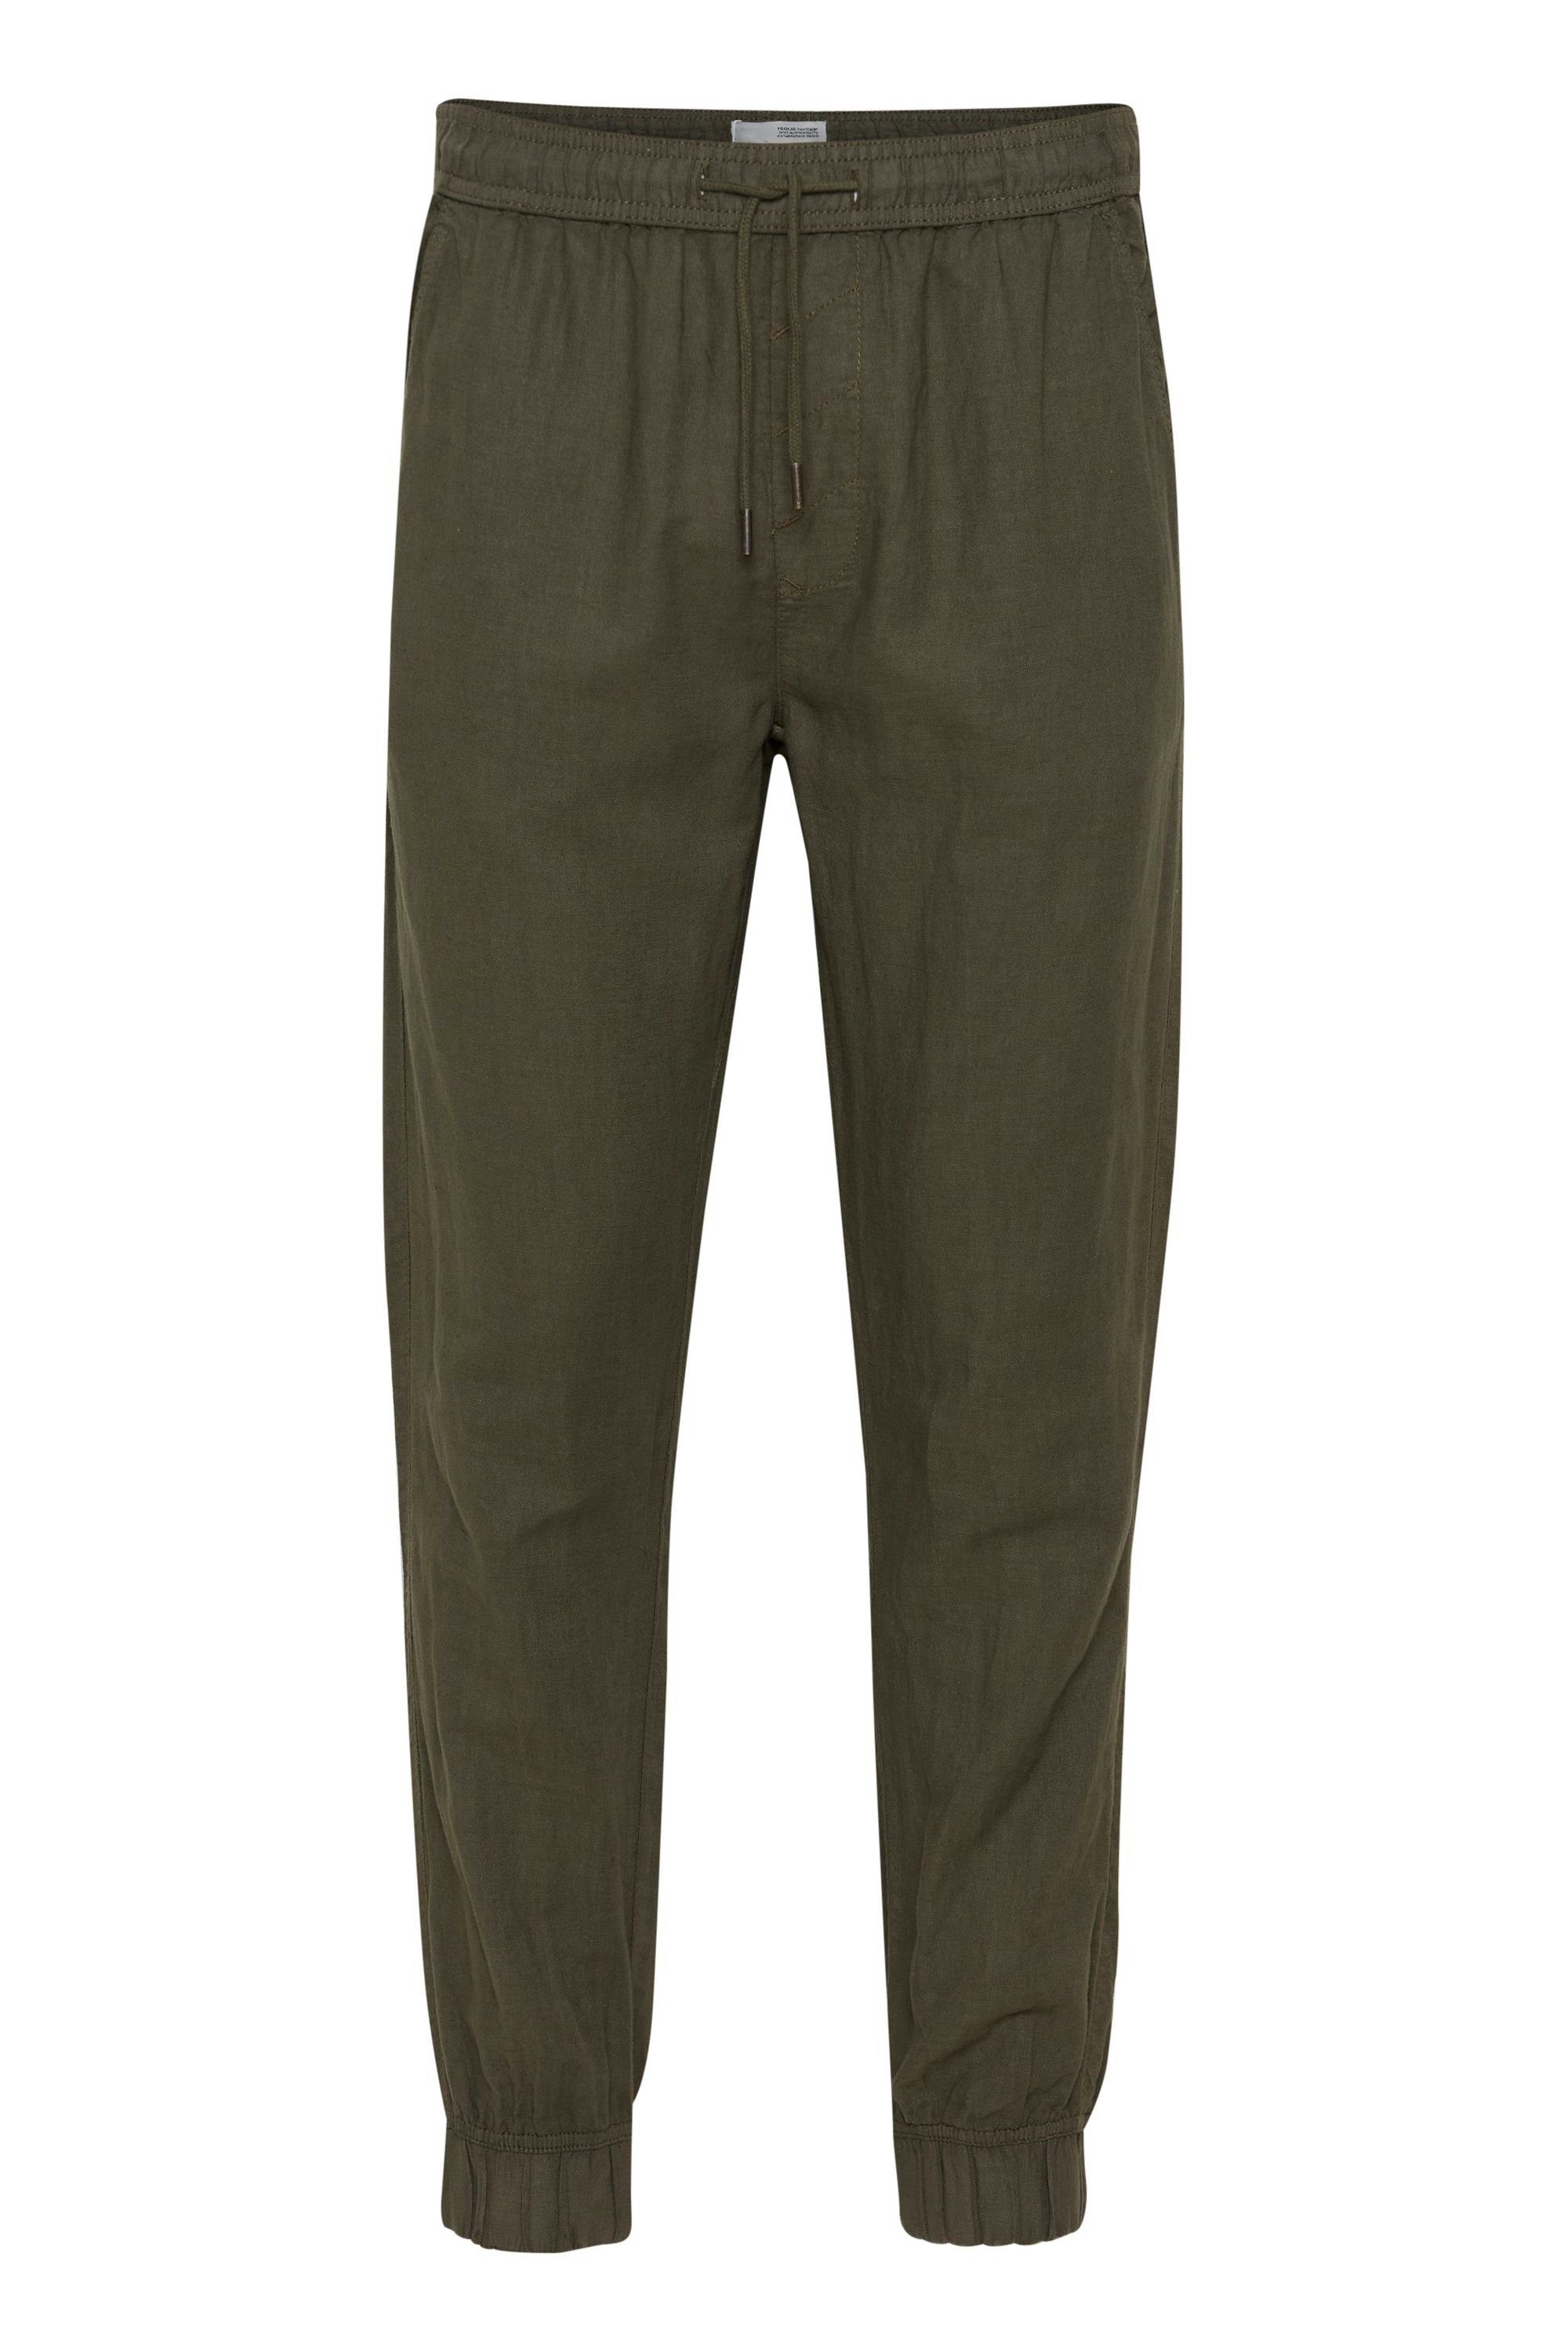 !Solid Stoffhose SDTruc Cuff Linen - 21105623 lange Stoffhose IVY GREEN (190512)